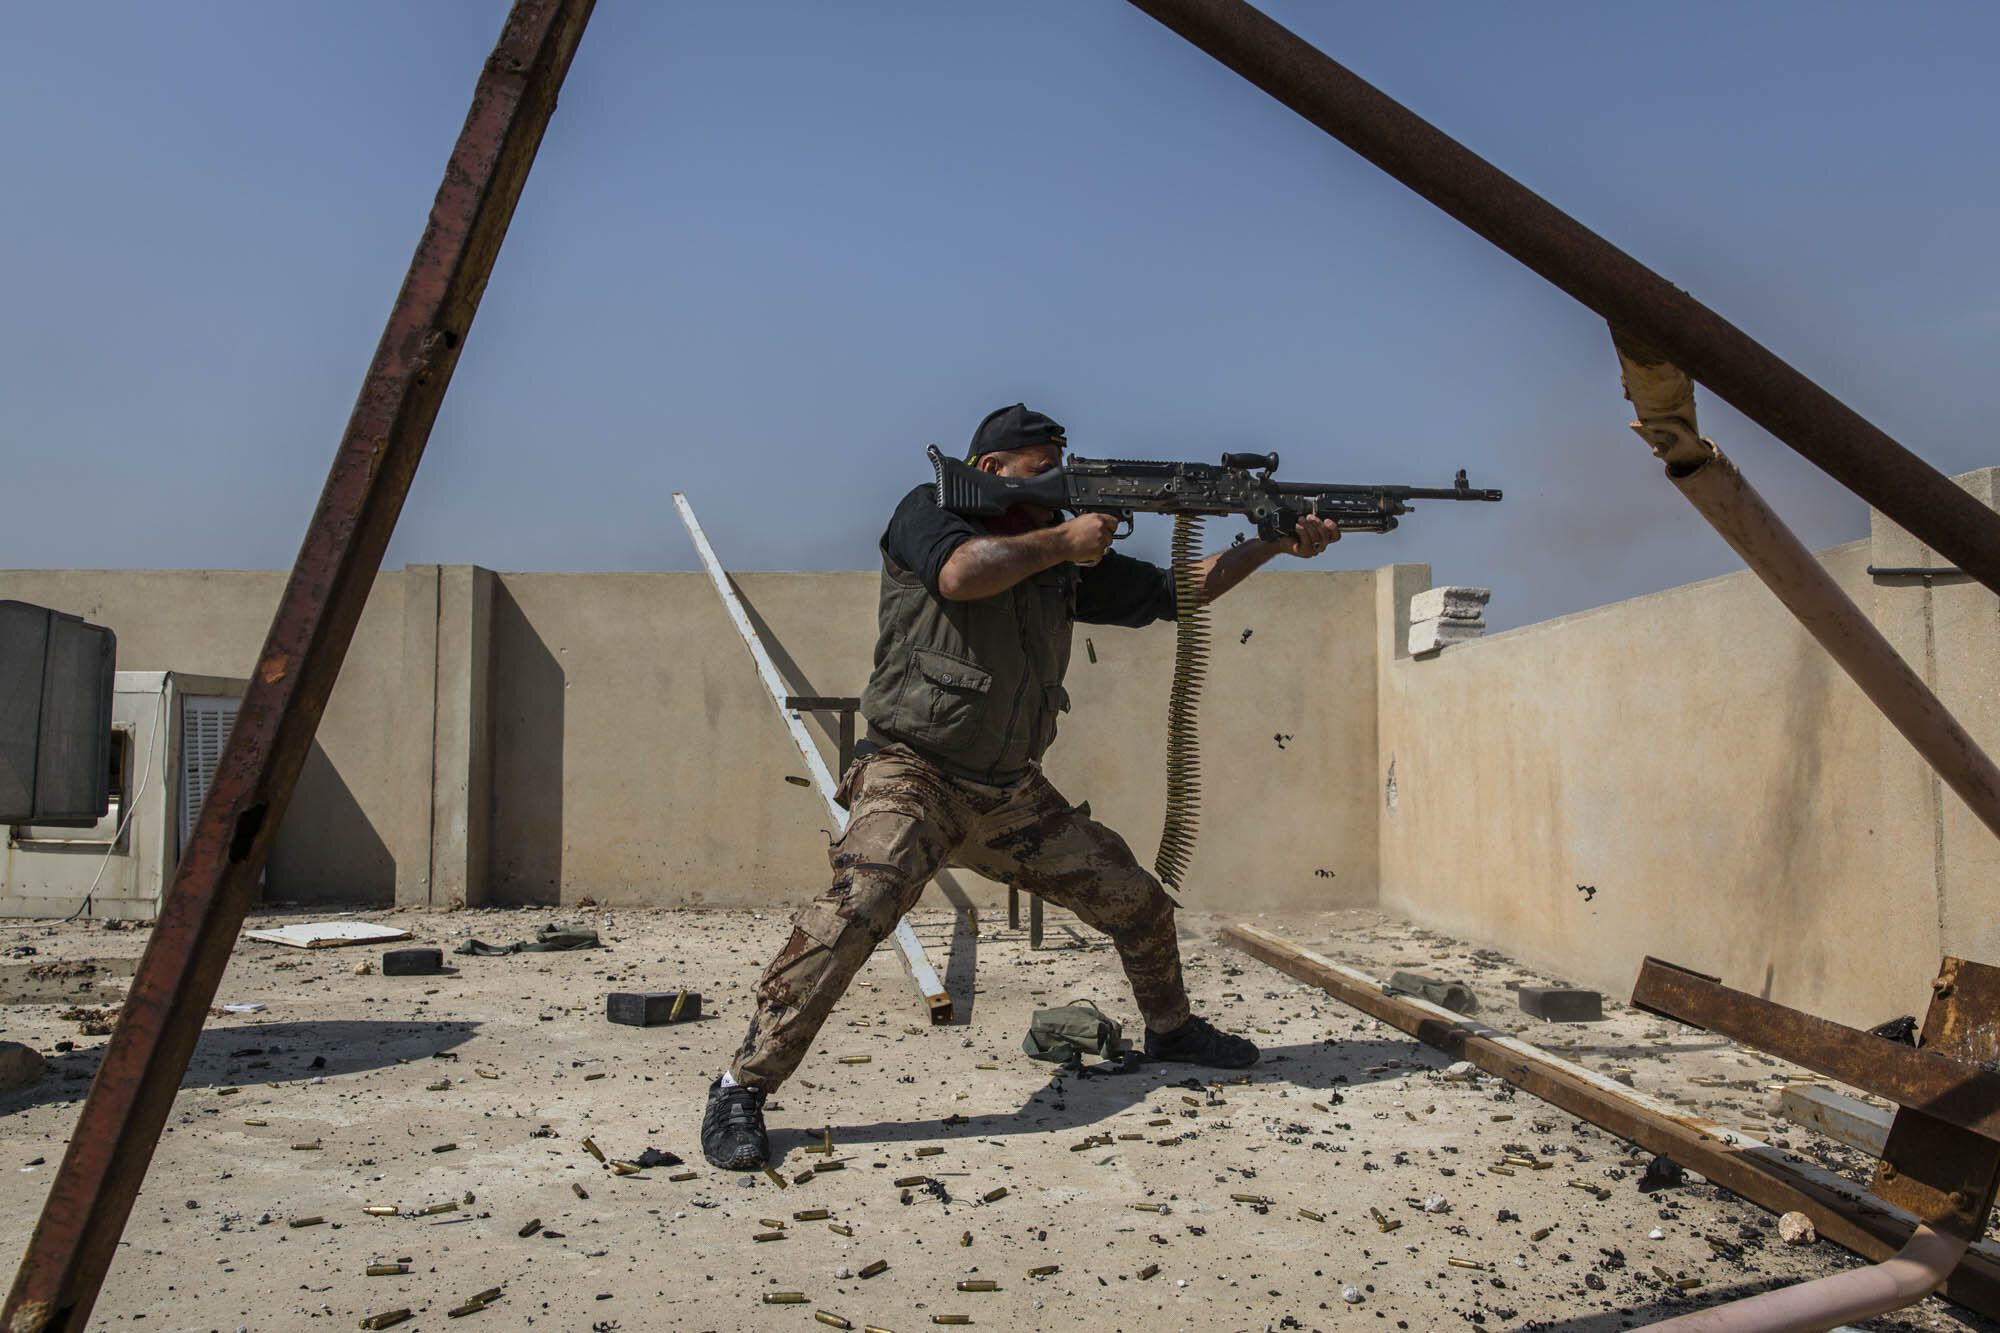  An Iraqi special forces soldier fired on ISIS positions from a rooftop on the frontline in the Shuhada neighbourhood of west Mosul. Iraq - March 2017 